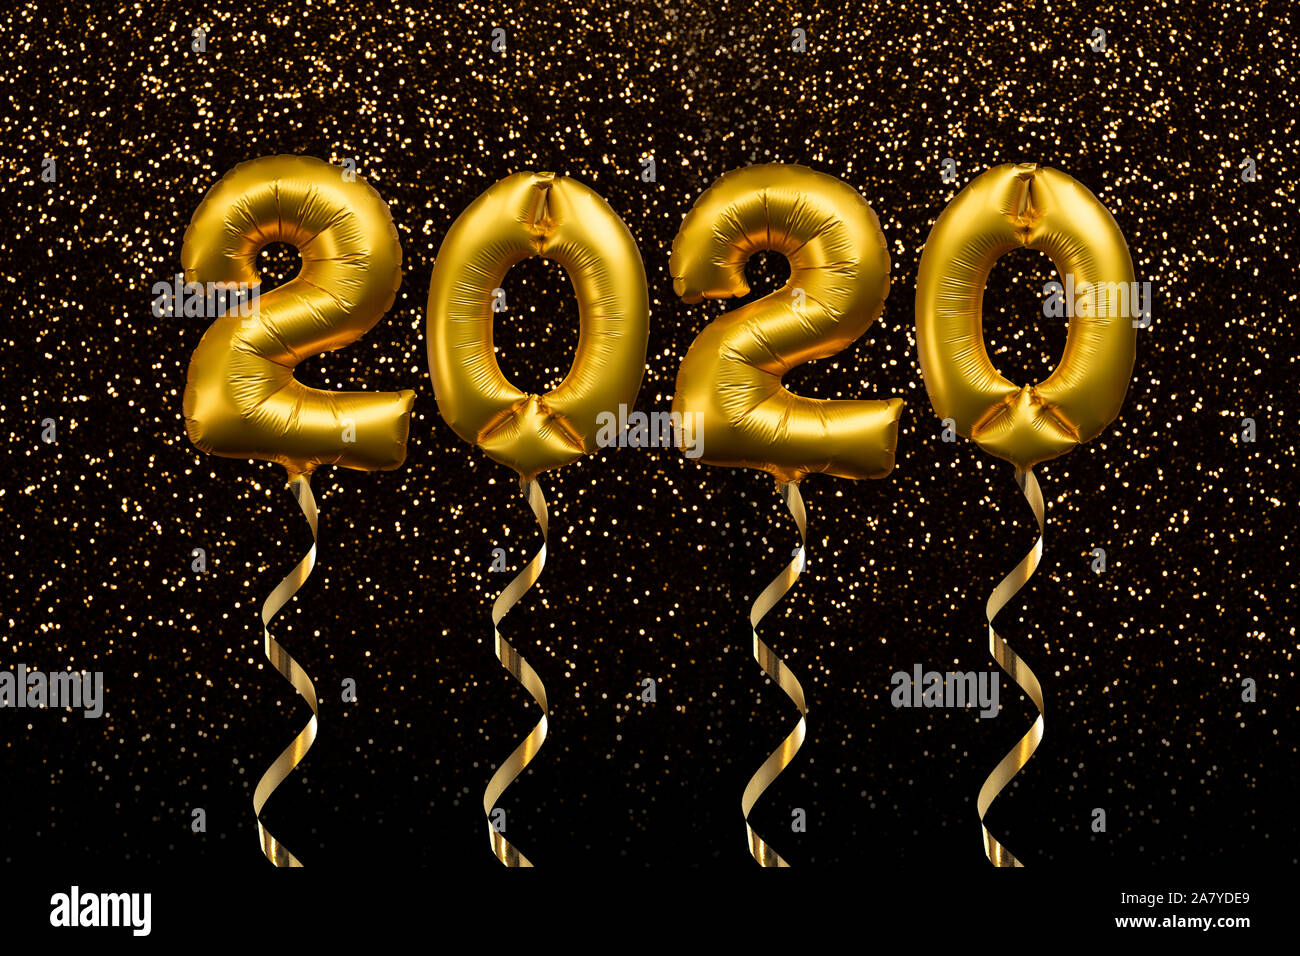 2020 written with golden balloons floating on gold glitter background, new year party greeting card Stock Photo